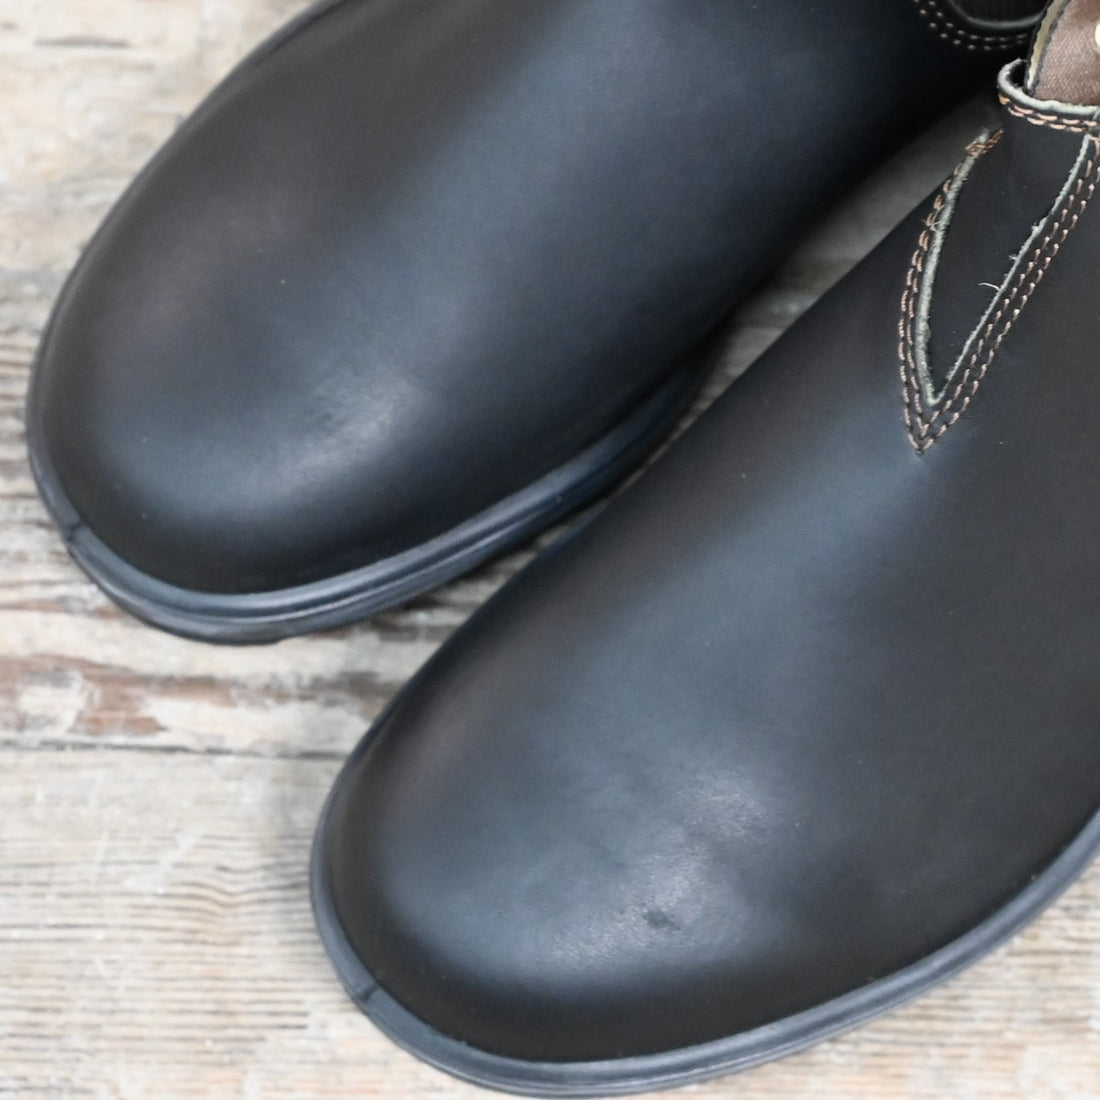 Blundstone Slip On In Stout Brown Leather view of toe